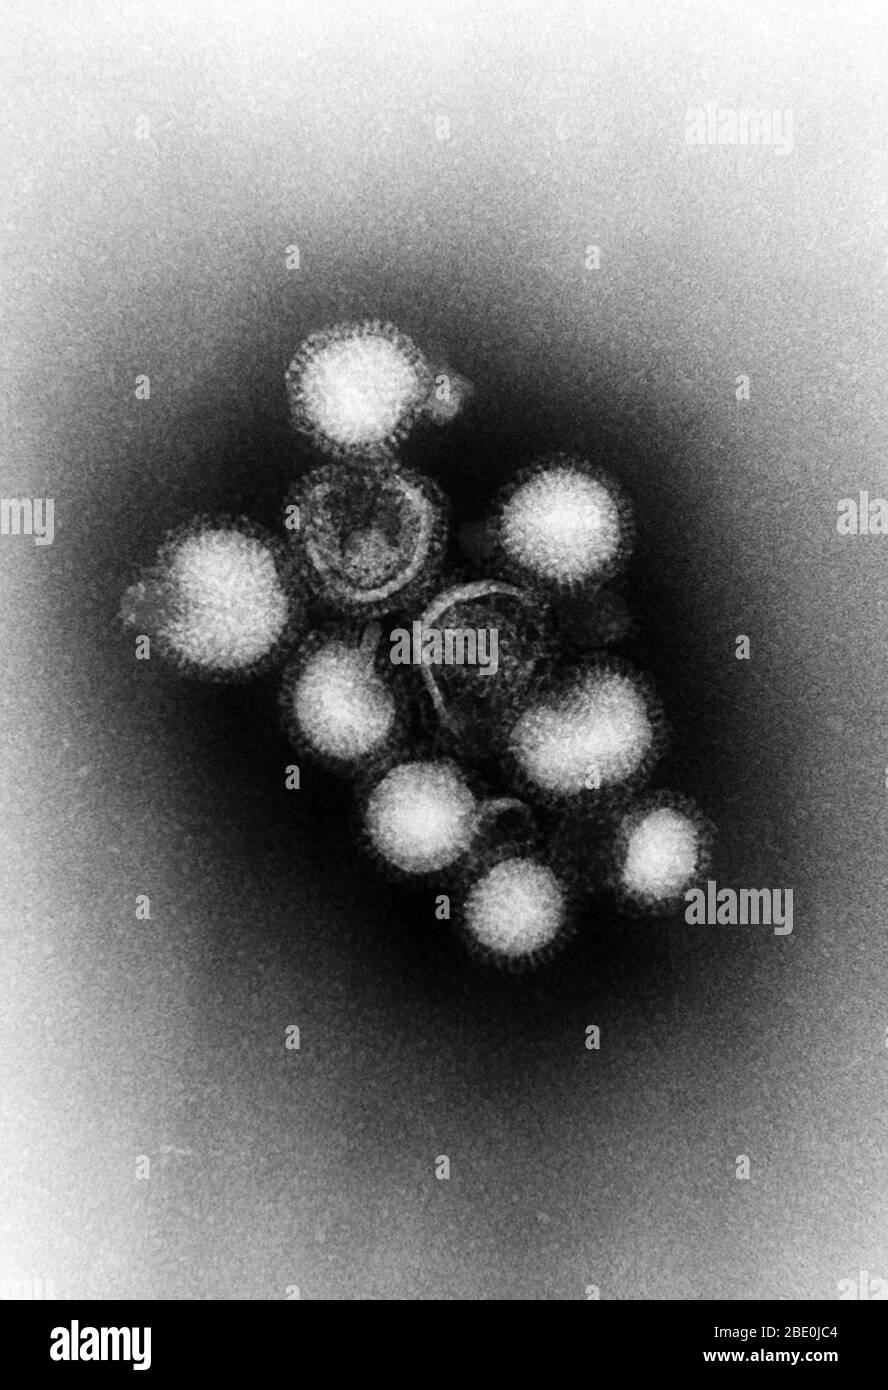 Negative-stained Transmission Electron Micrograph (TEM) showing you a number of Influenza A virions. Influenza A virus causes influenza in birds and some mammals, and is the only species of influenza virus A. Influenza virus A is a genus of the Orthomyxoviridae family of viruses. Strains of all subtypes of influenza A virus have been isolated from wild birds, although disease is uncommon. Some isolates of influenza A virus cause severe disease both in domestic poultry and, rarely, in humans. Occasionally, viruses are transmitted from wild aquatic birds to domestic poultry, and this may cause a Stock Photo